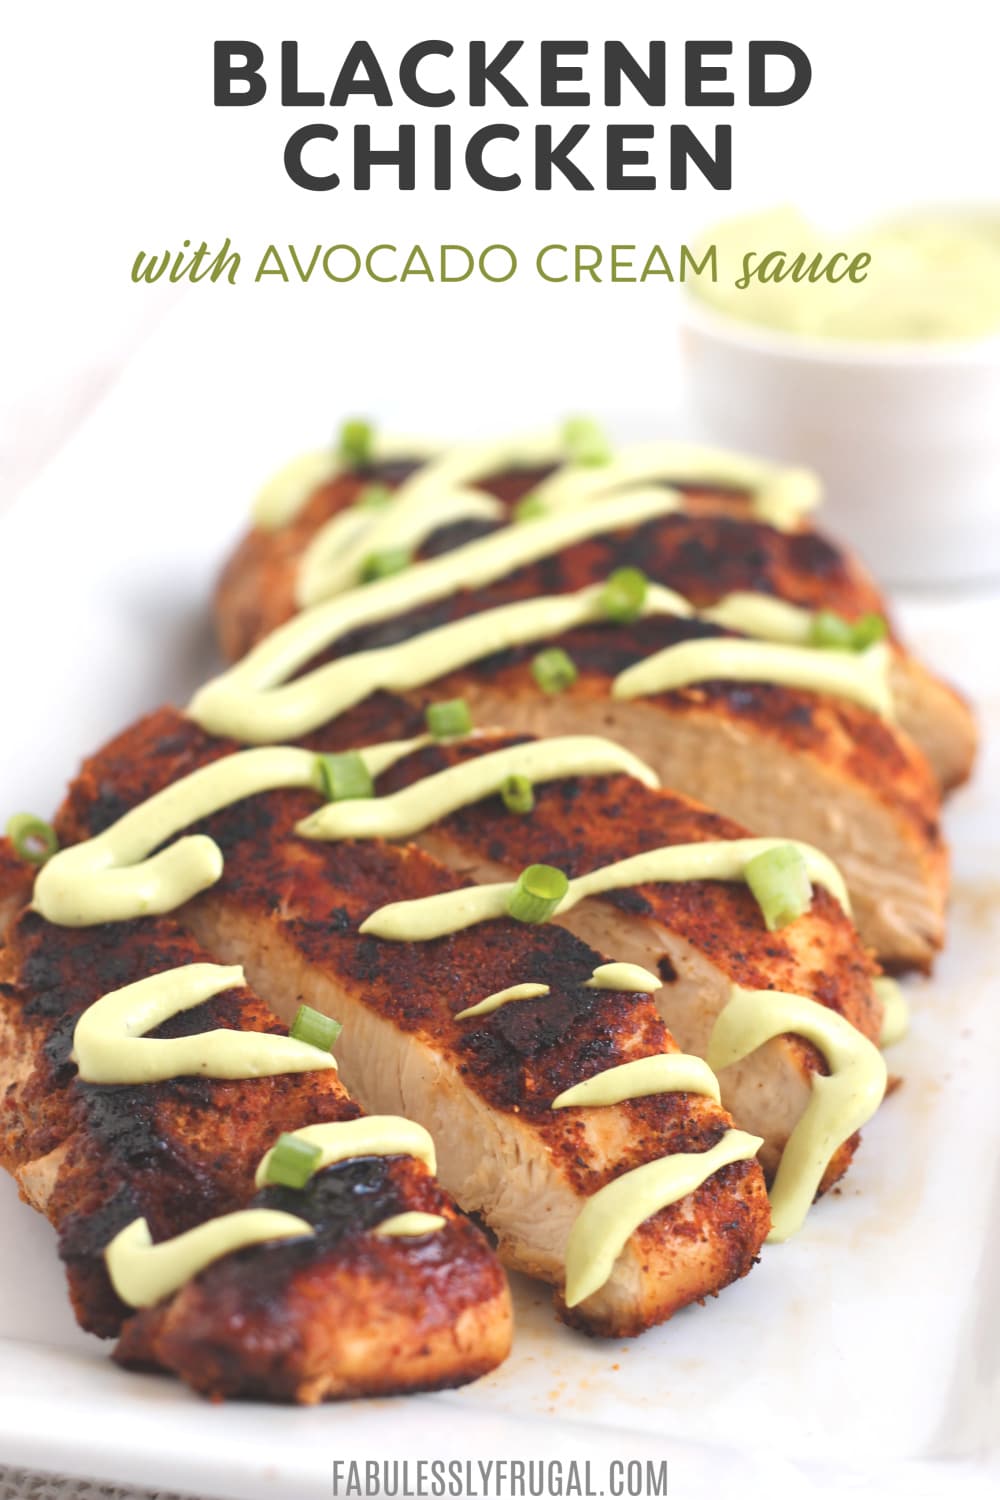 Delicious and EASY Blackened Chicken with Avocado Cream Sauce